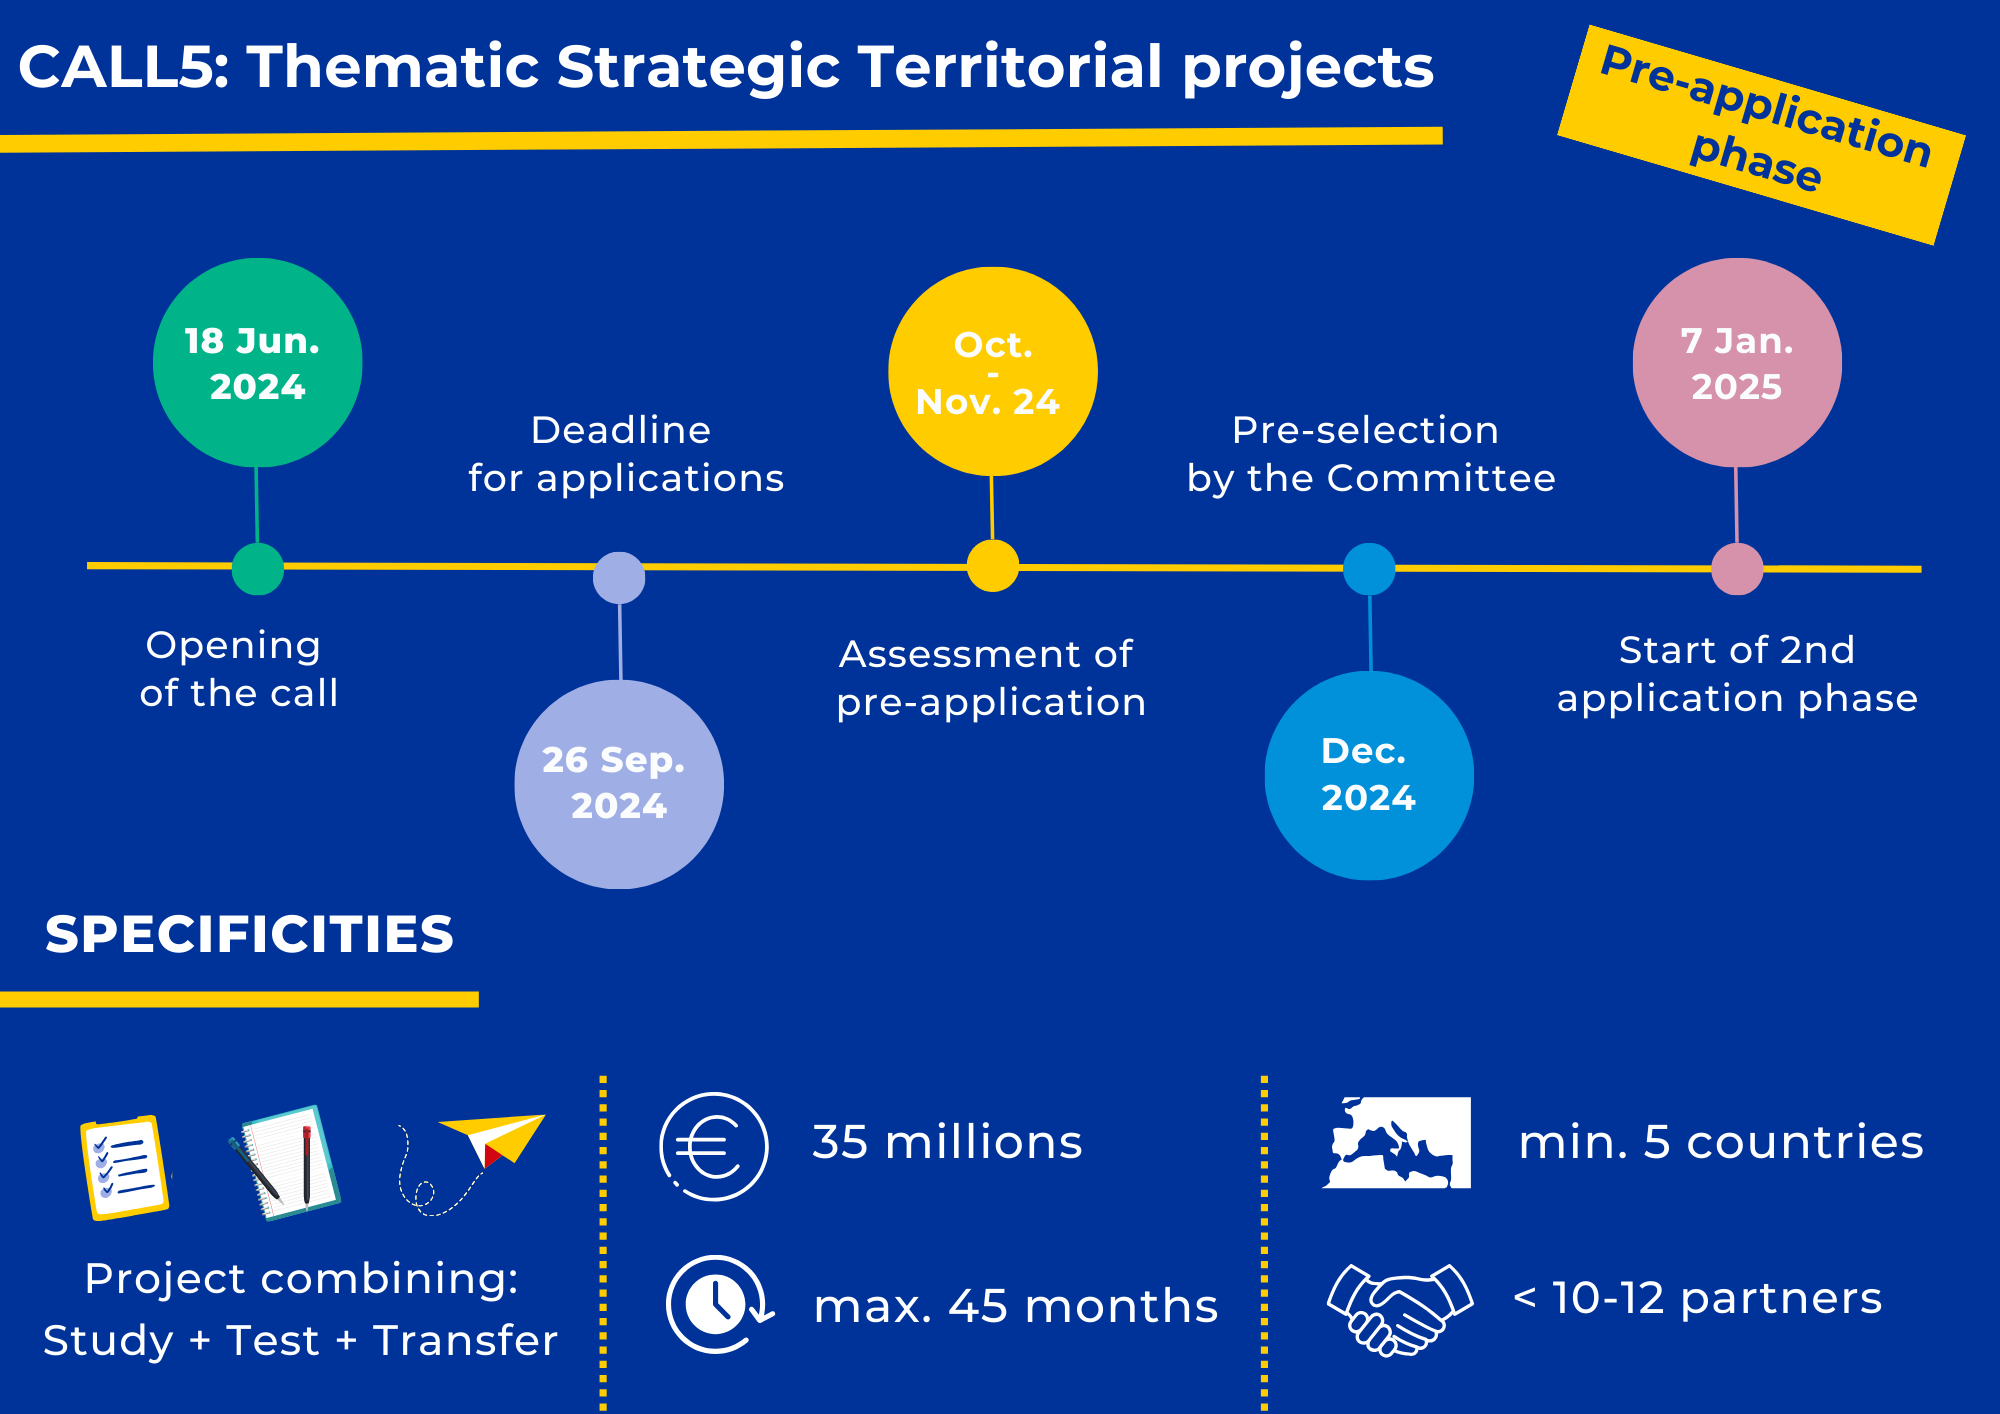 INTERREG Euro-MED Call 5: Thematic Strategic Territorial Projects